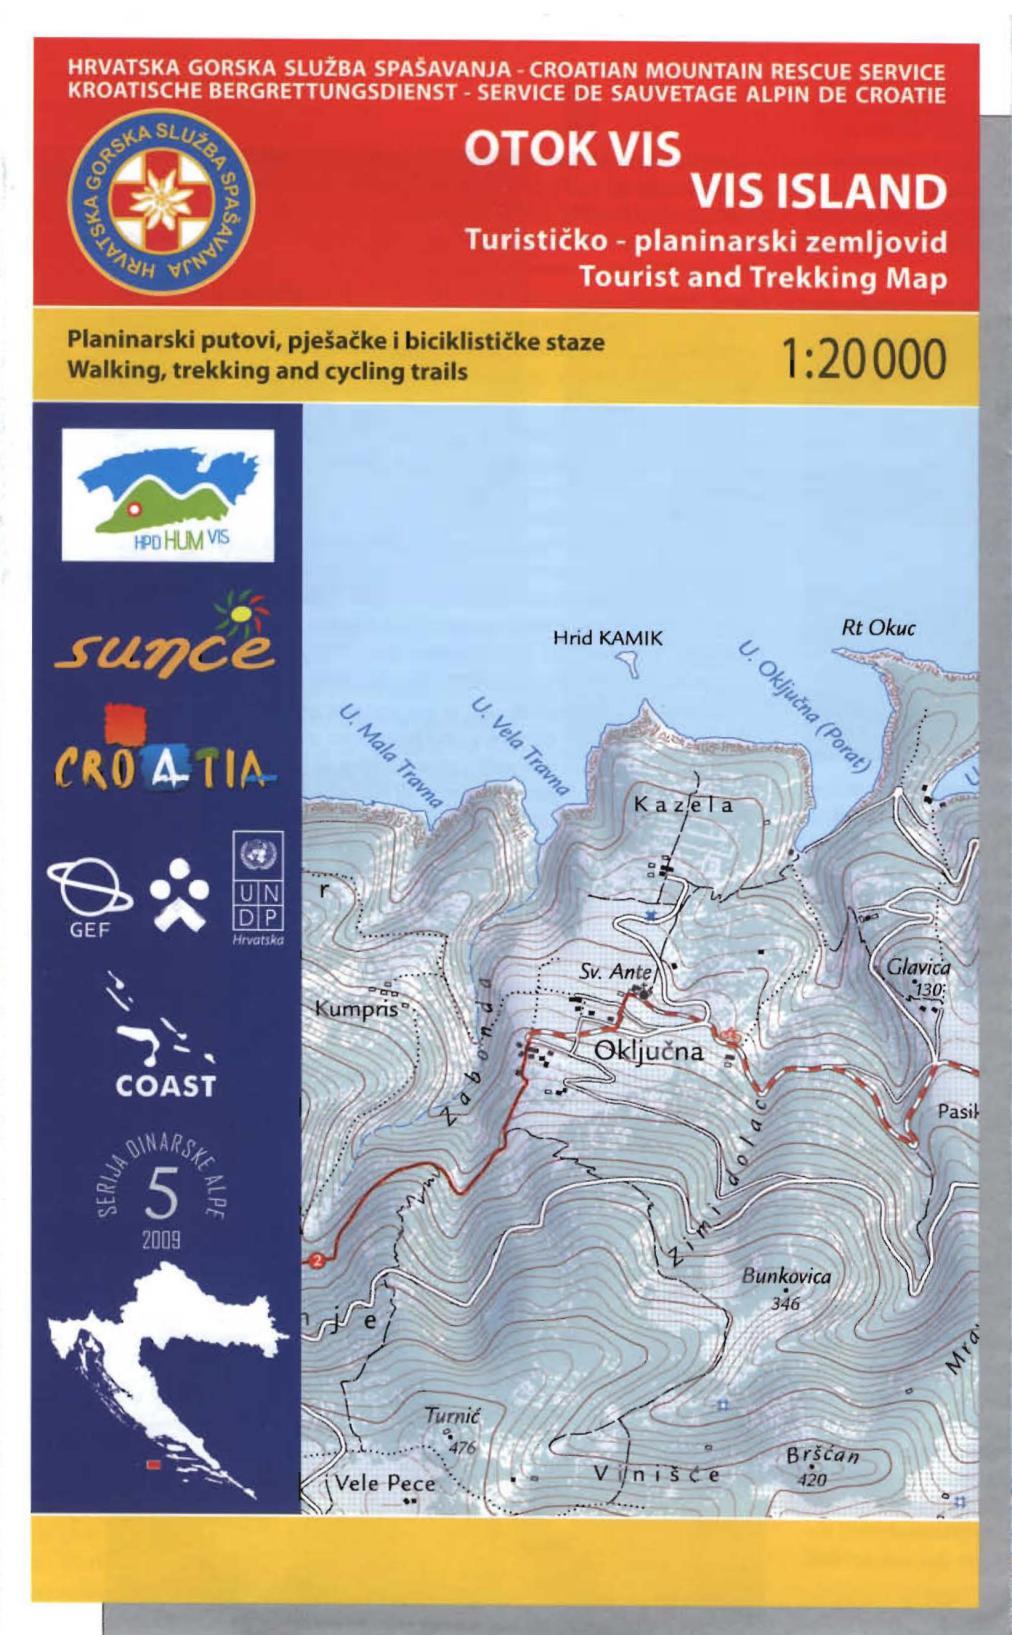 MAP AND ATLAS REVIEWS Analysis and Comparison of Three Tourist-Hiking Maps ISLAND OF VIS Tourist-hiking map Nature Park BIOKOVO Tourist-hiking map ORJEN-SNIJEŽNICA Hiking-tourist map The Croatian